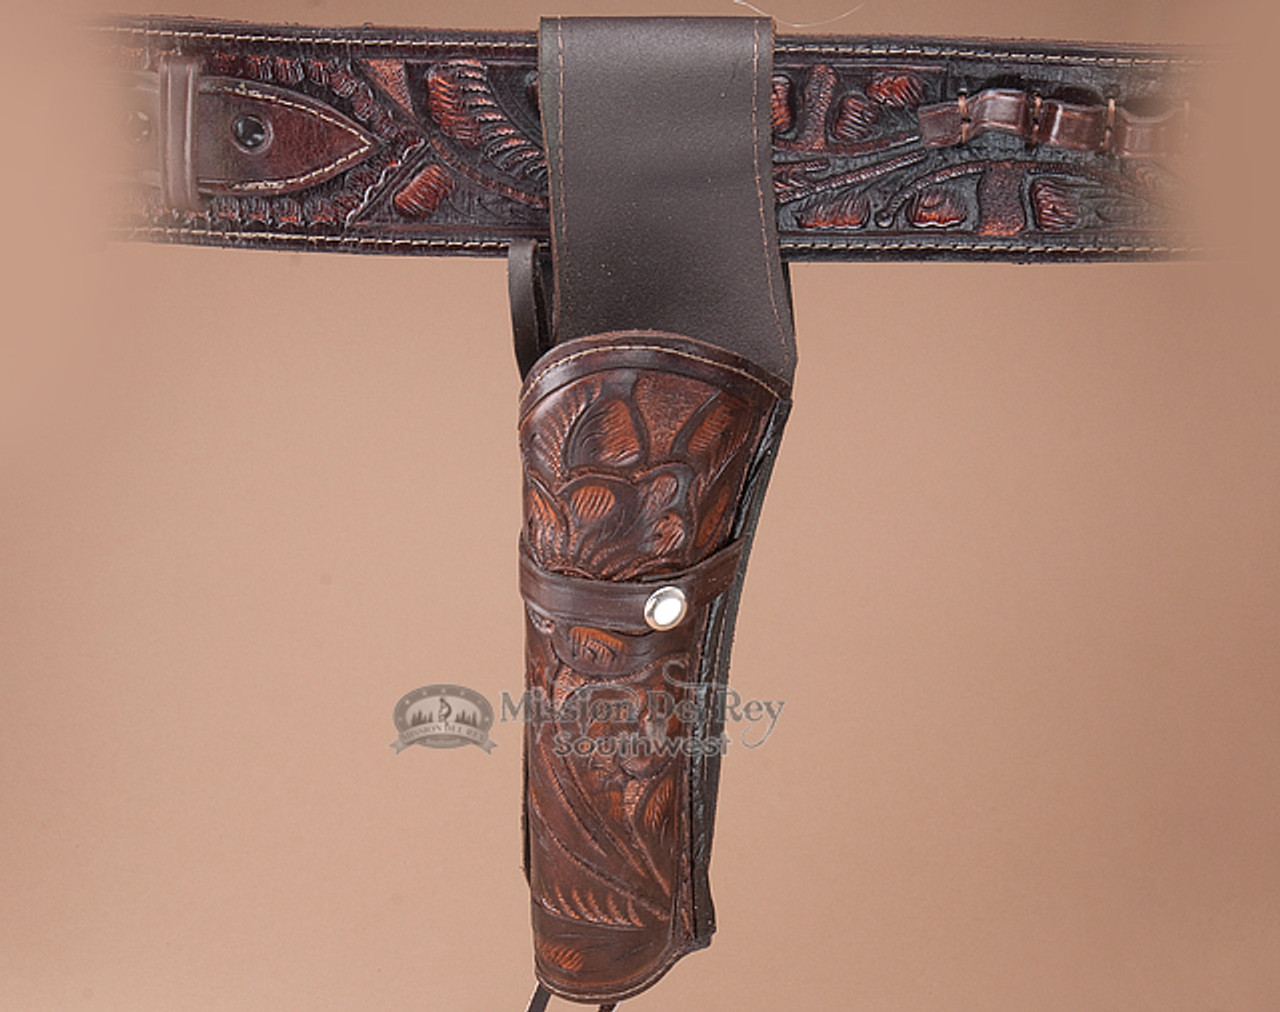 https://cdn11.bigcommerce.com/s-3y1hjx24/images/stencil/1280x1280/products/18792/18832/tooled-western-gun-holster-10-left-handed-h3-3__51475.1653427104.jpg?c=2?imbypass=on